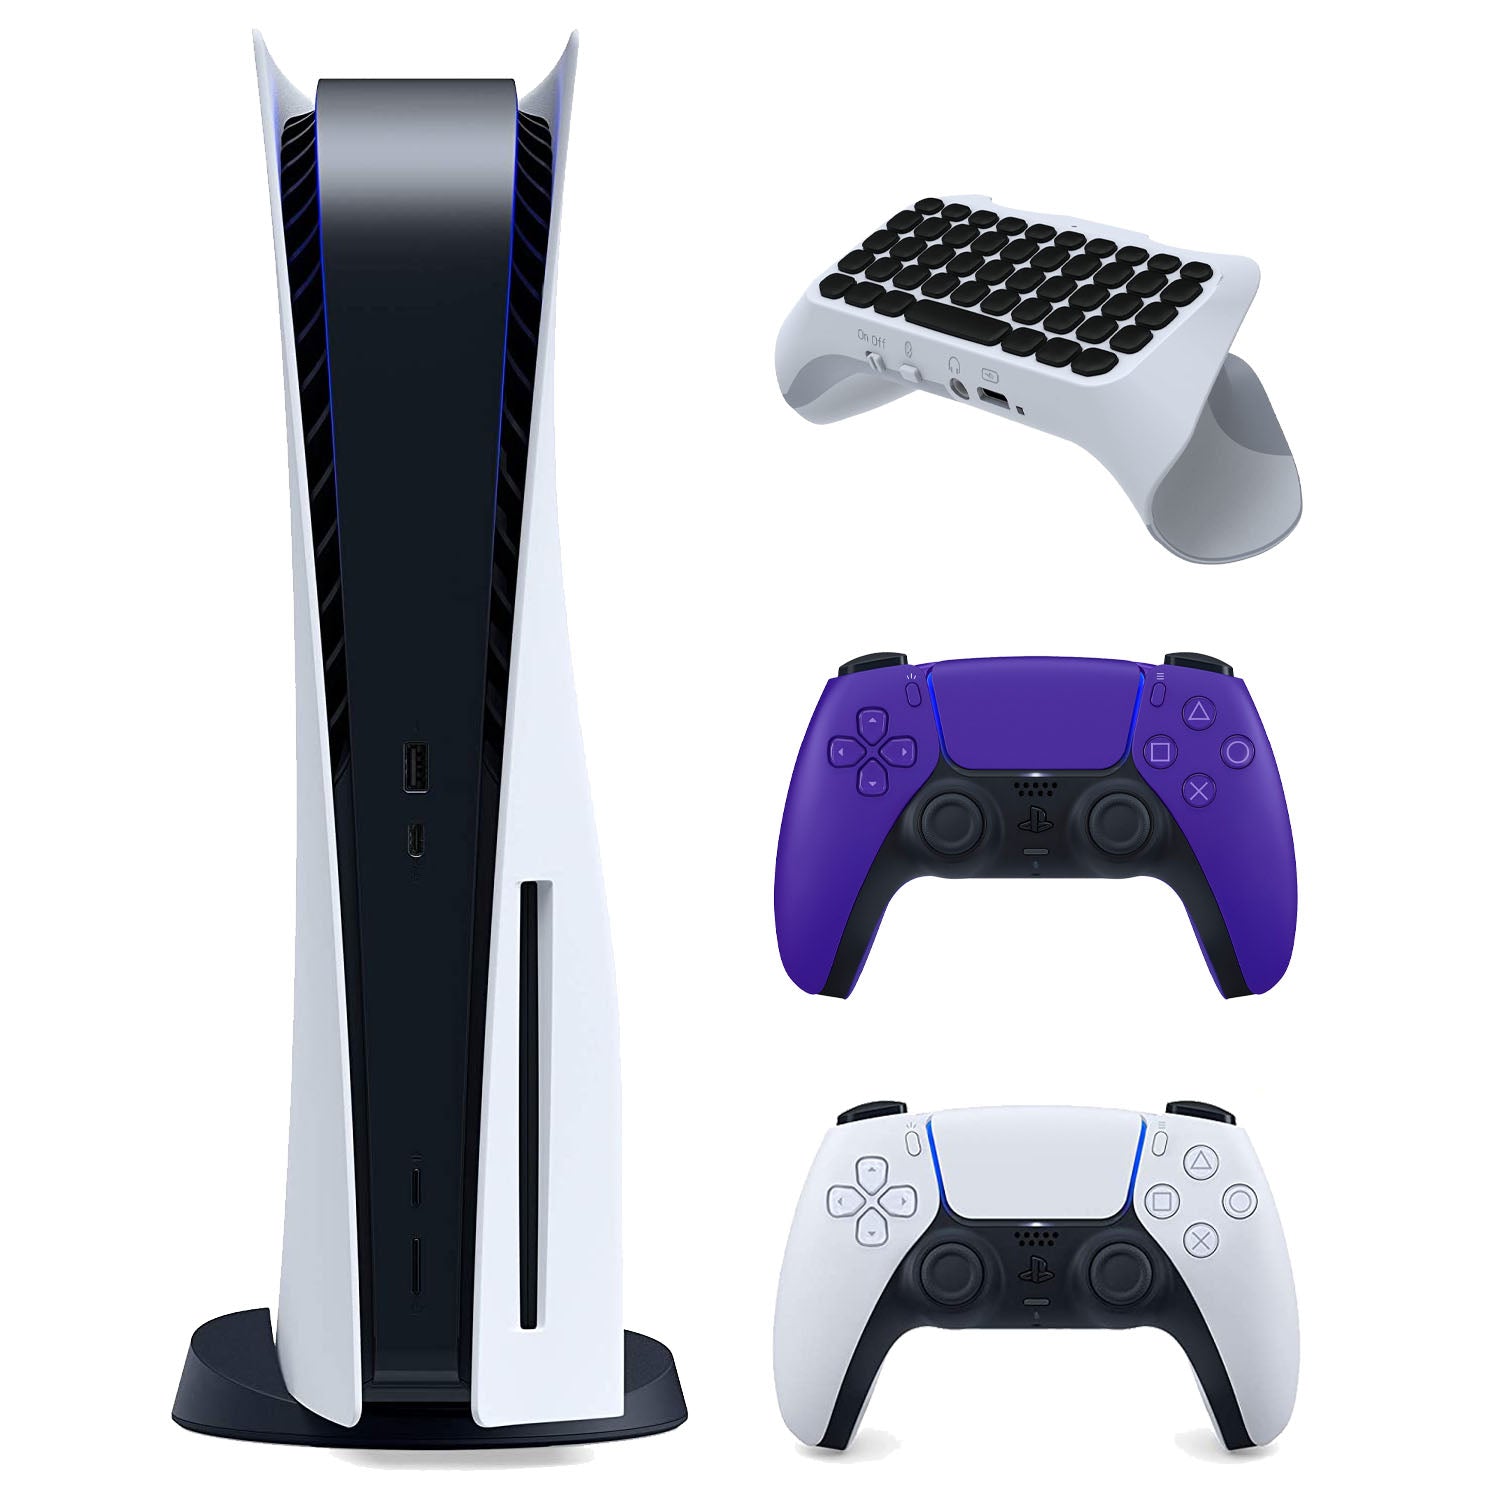 Sony Playstation 5 Disc Version Console (Japan Import) with Extra Purple Controller and Surge QuickType 2.0 Wireless PS5 Controller Keypad - Pro-Distributing